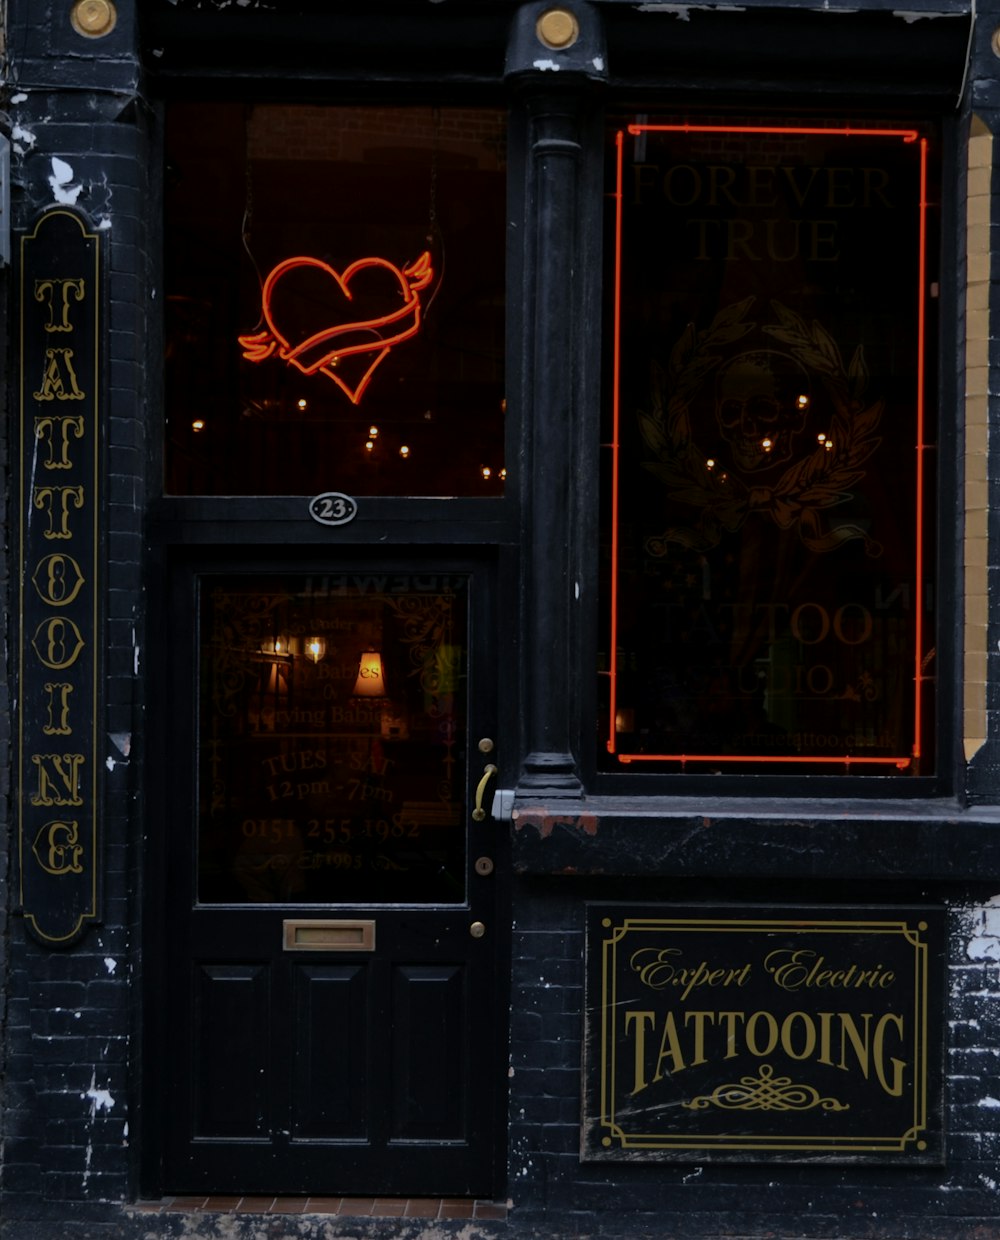 Tattooing building